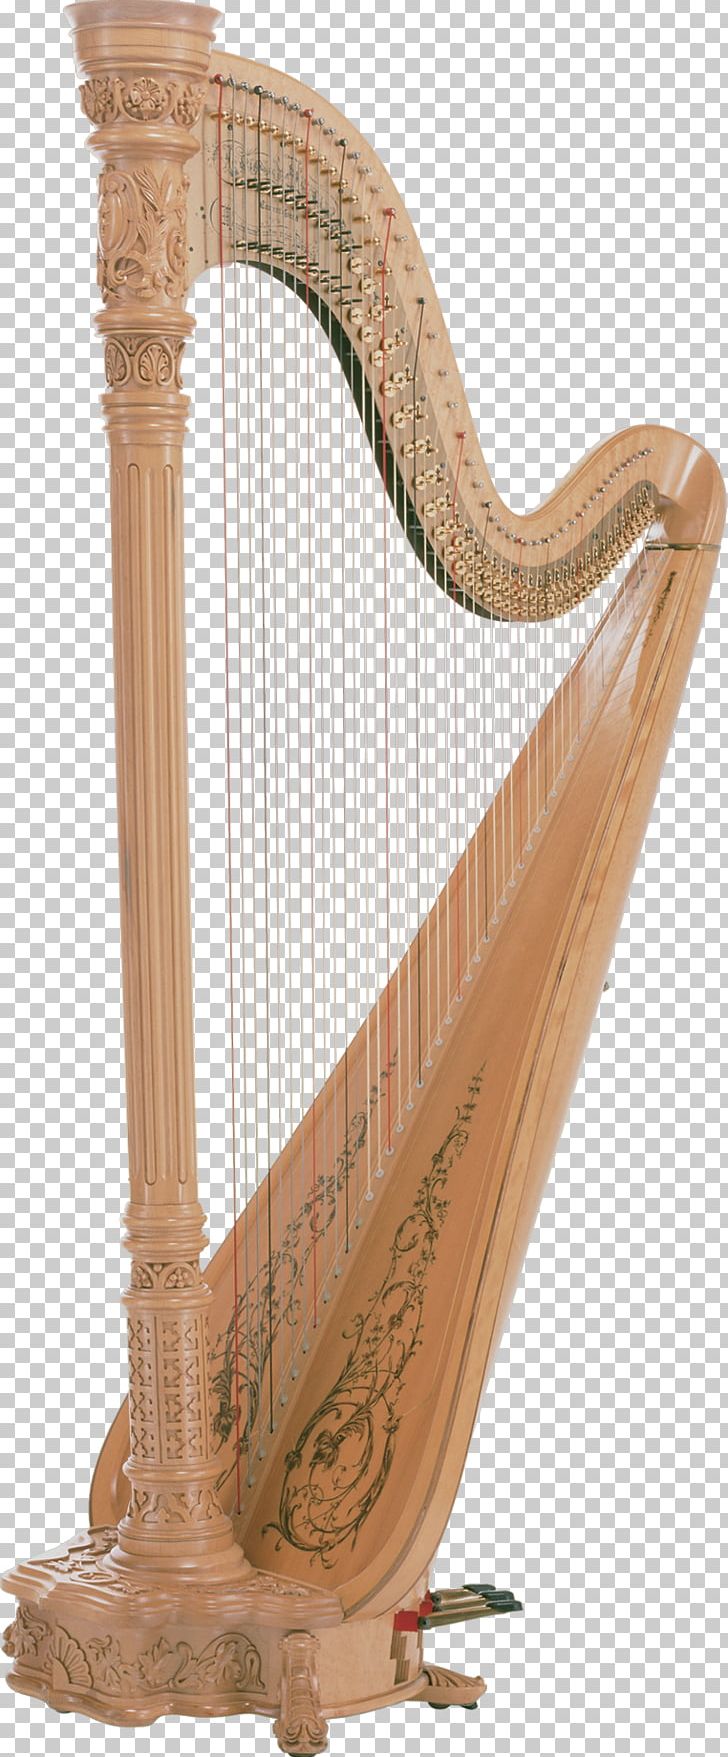 Harp Musical Instrument Plucked String Instrument PNG, Clipart, Clarsach, Download, Duxianqin, Guitar, Guqin Free PNG Download